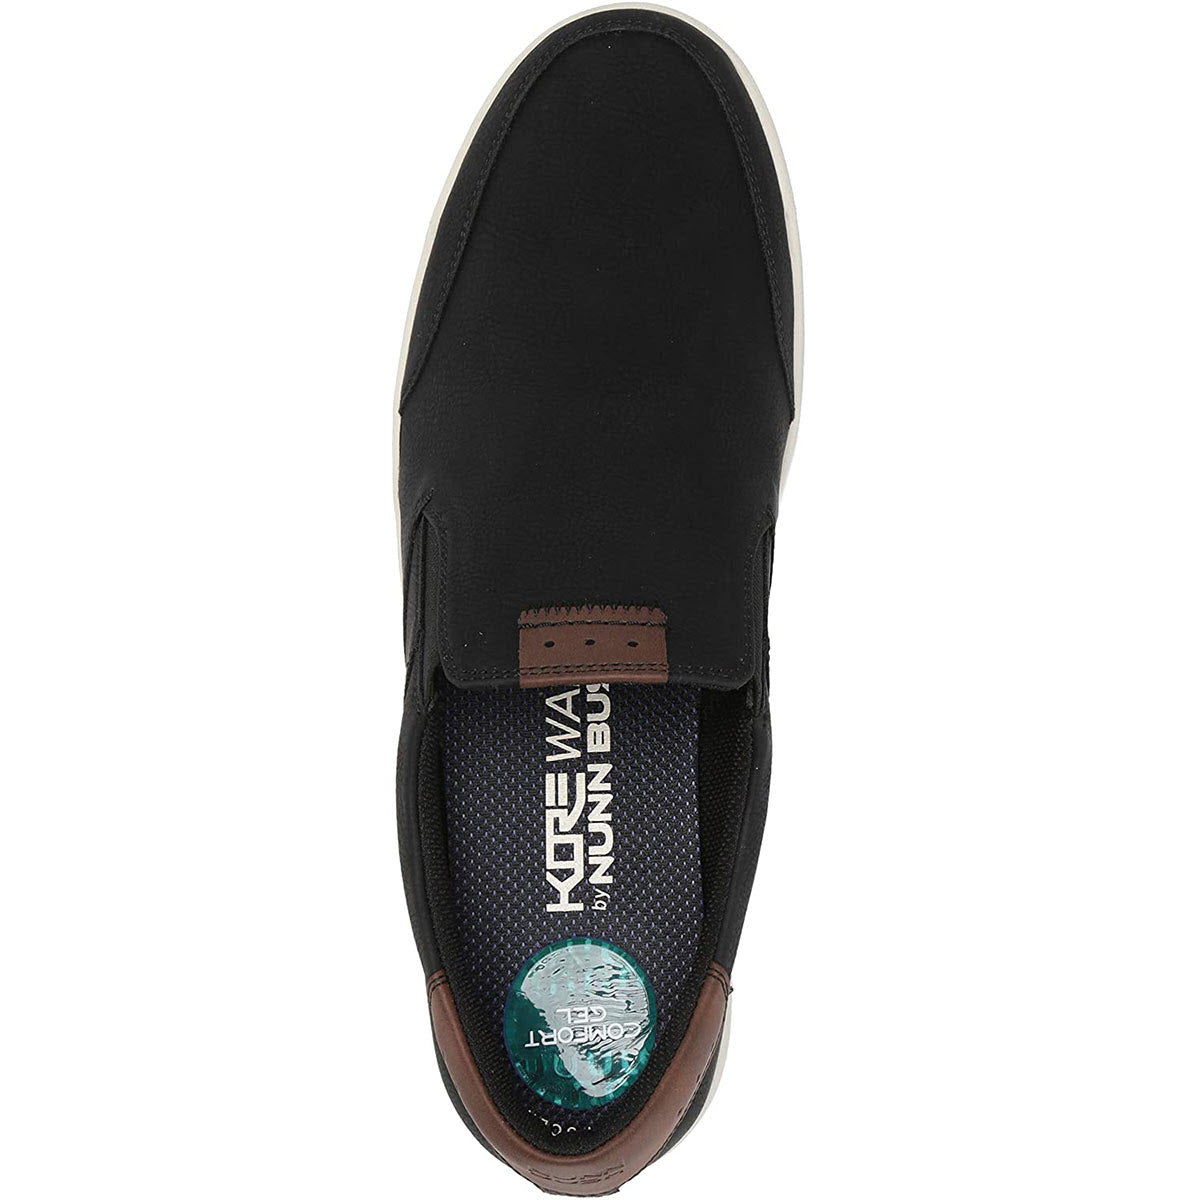 Top view of a single black leather Nunn Bush Kore City Walk Slip-On shoe with a visible brand logo on the Comfort Gel footbed.